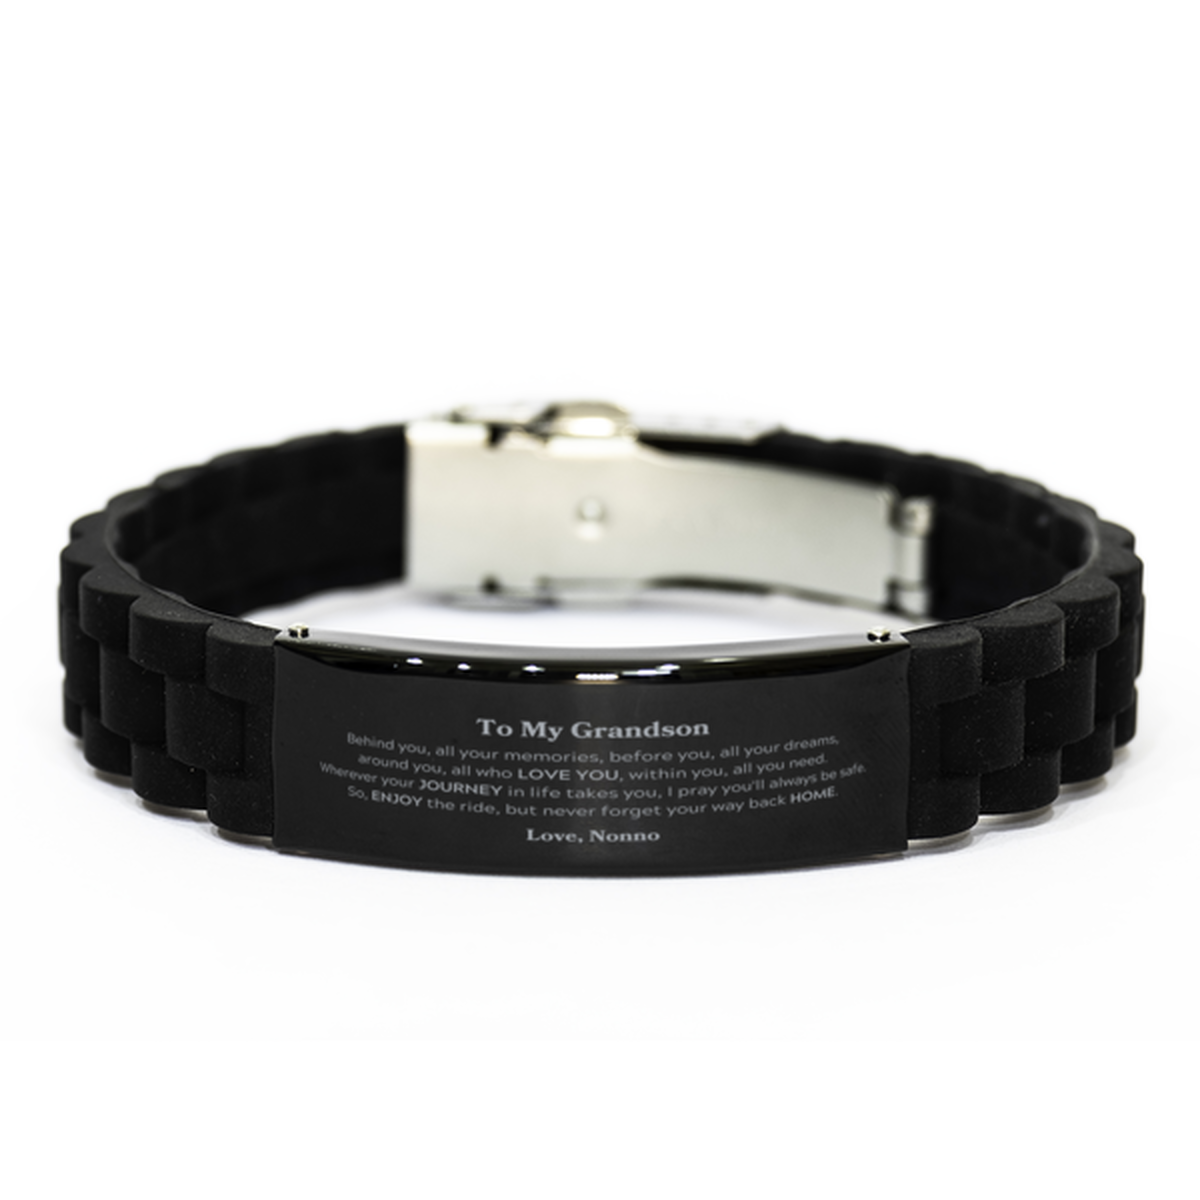 To My Grandson Graduation Gifts from Nonno, Grandson Black Glidelock Clasp Bracelet Christmas Birthday Gifts for Grandson Behind you, all your memories, before you, all your dreams. Love, Nonno